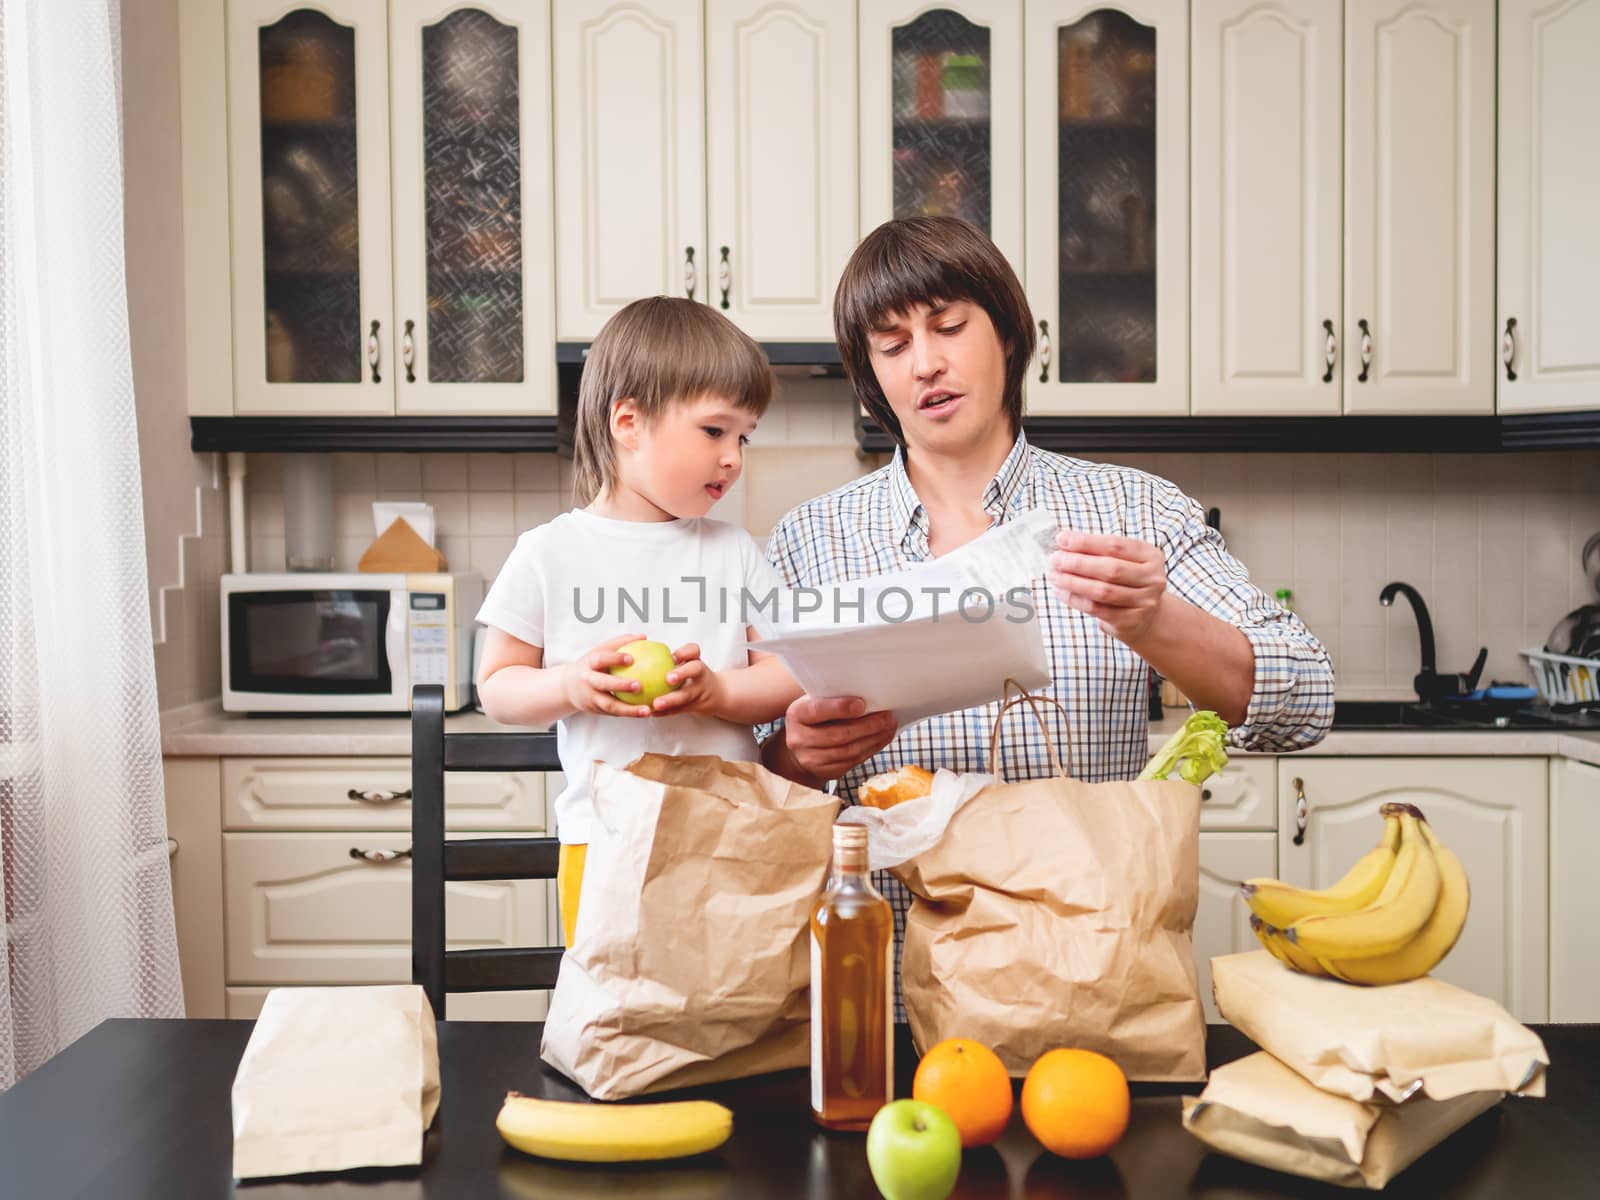 Family sorts out purchases in the kitchen. Father and son tastes products in bags made of craft paper. Healthy nutrition for whole family.